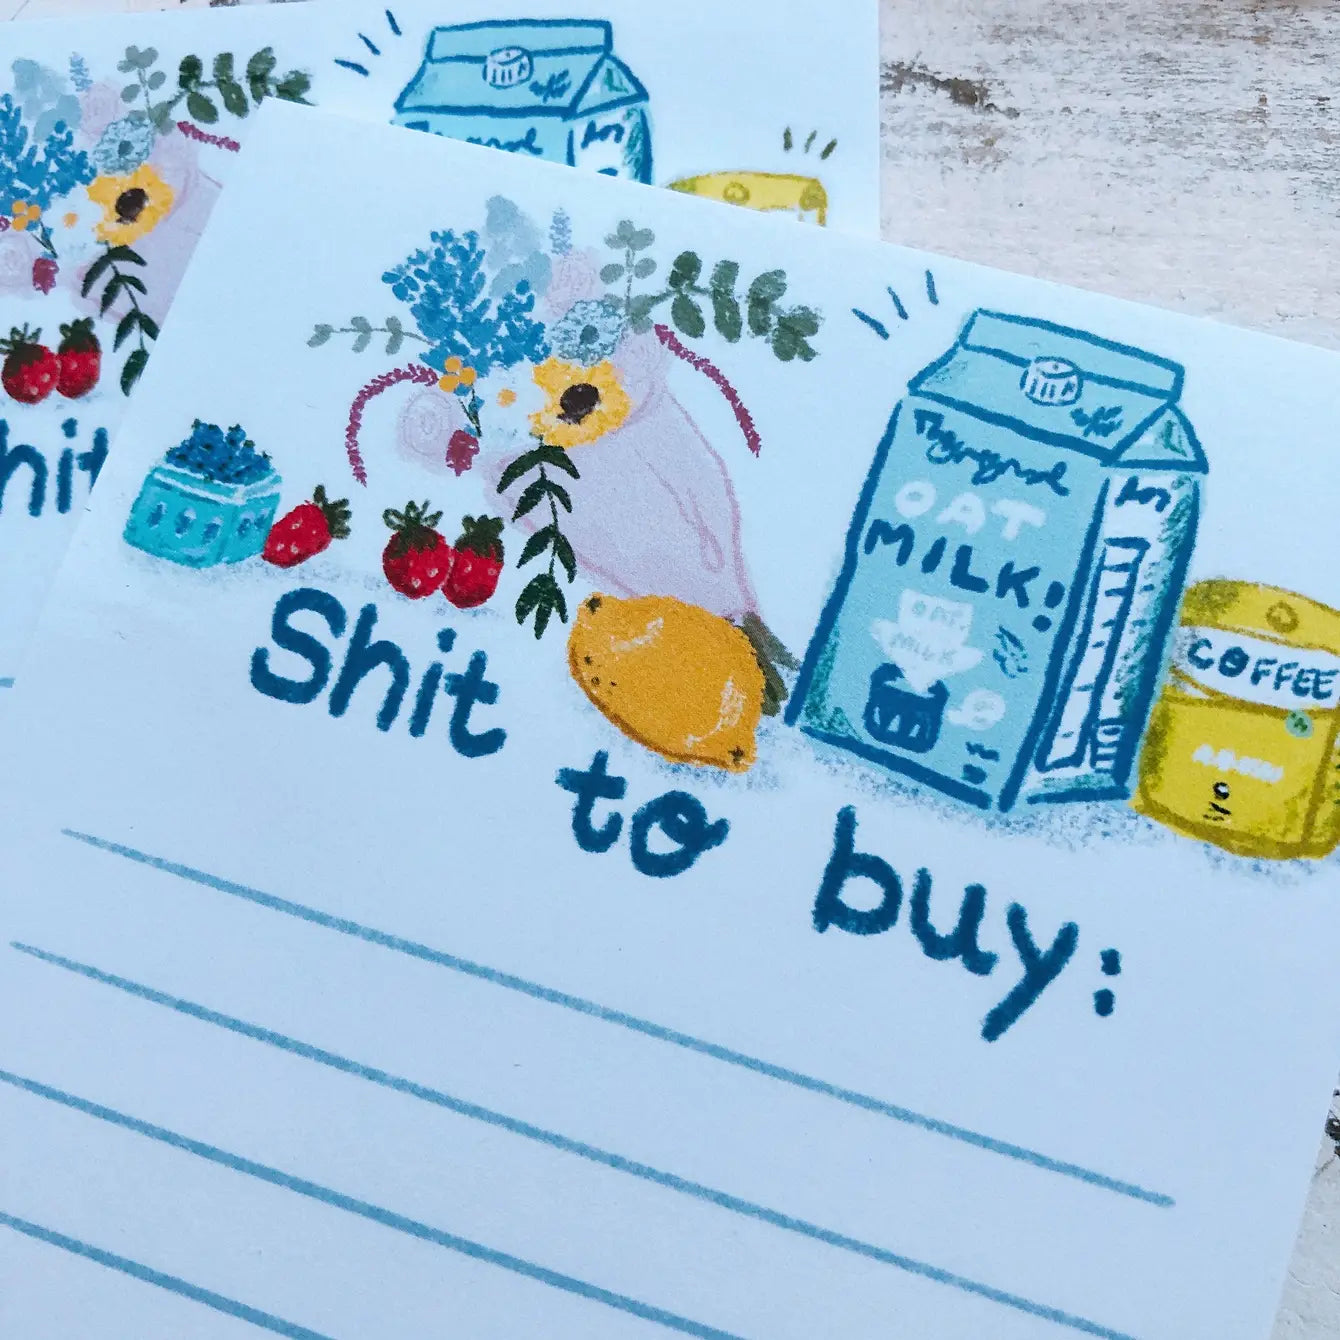 NEW! "Shit to buy" Notepad